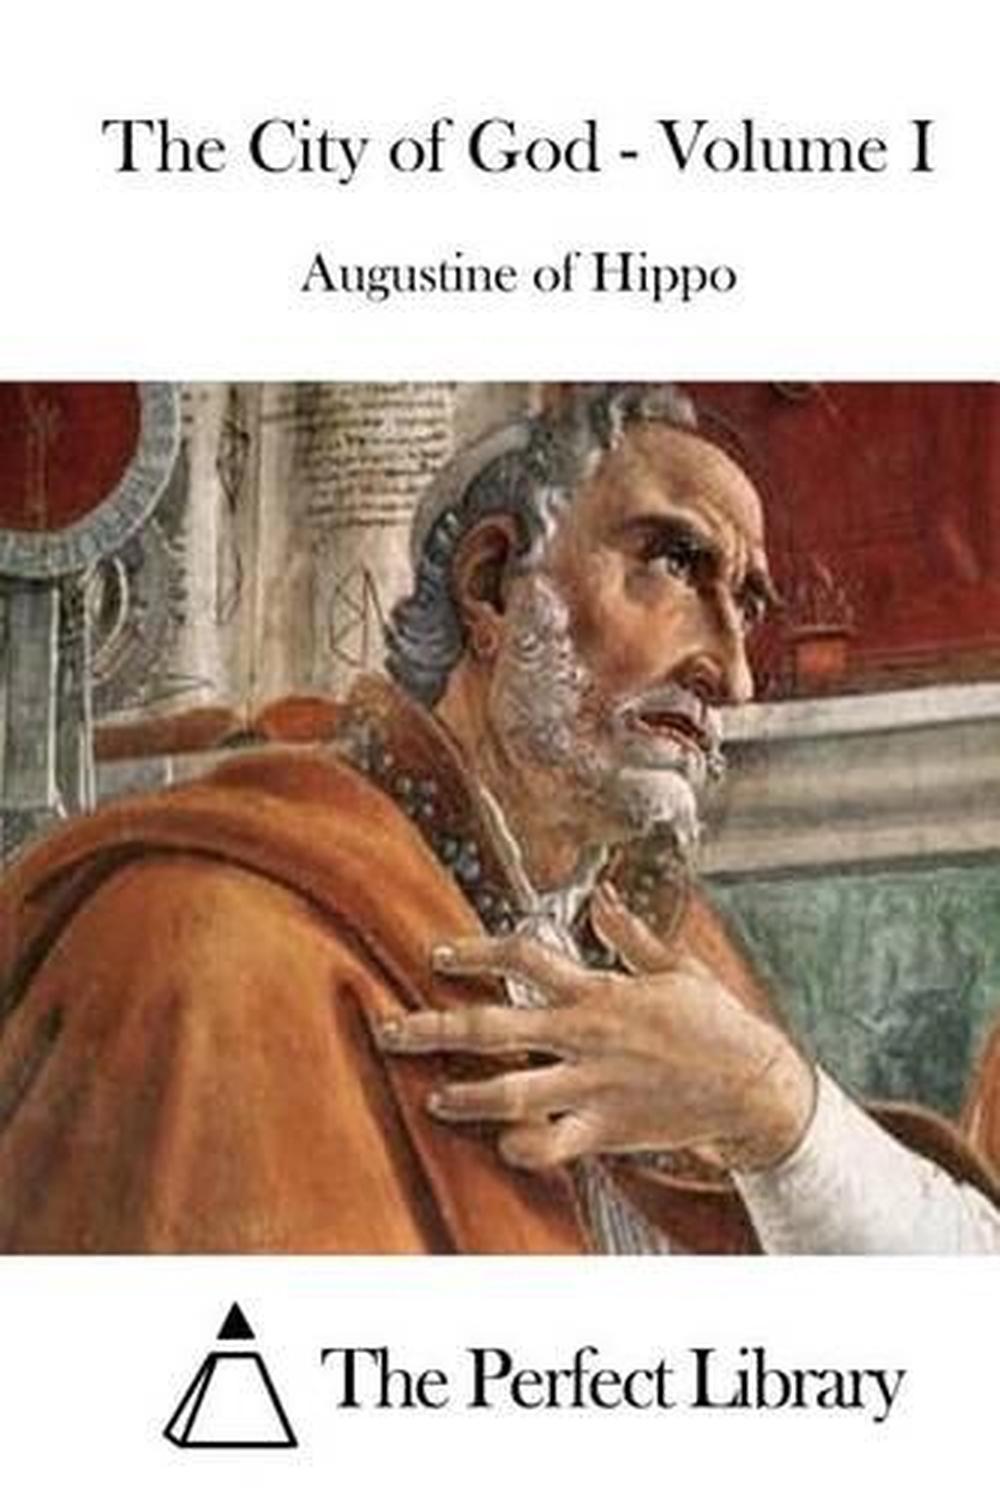 city of god by augustine of hippo